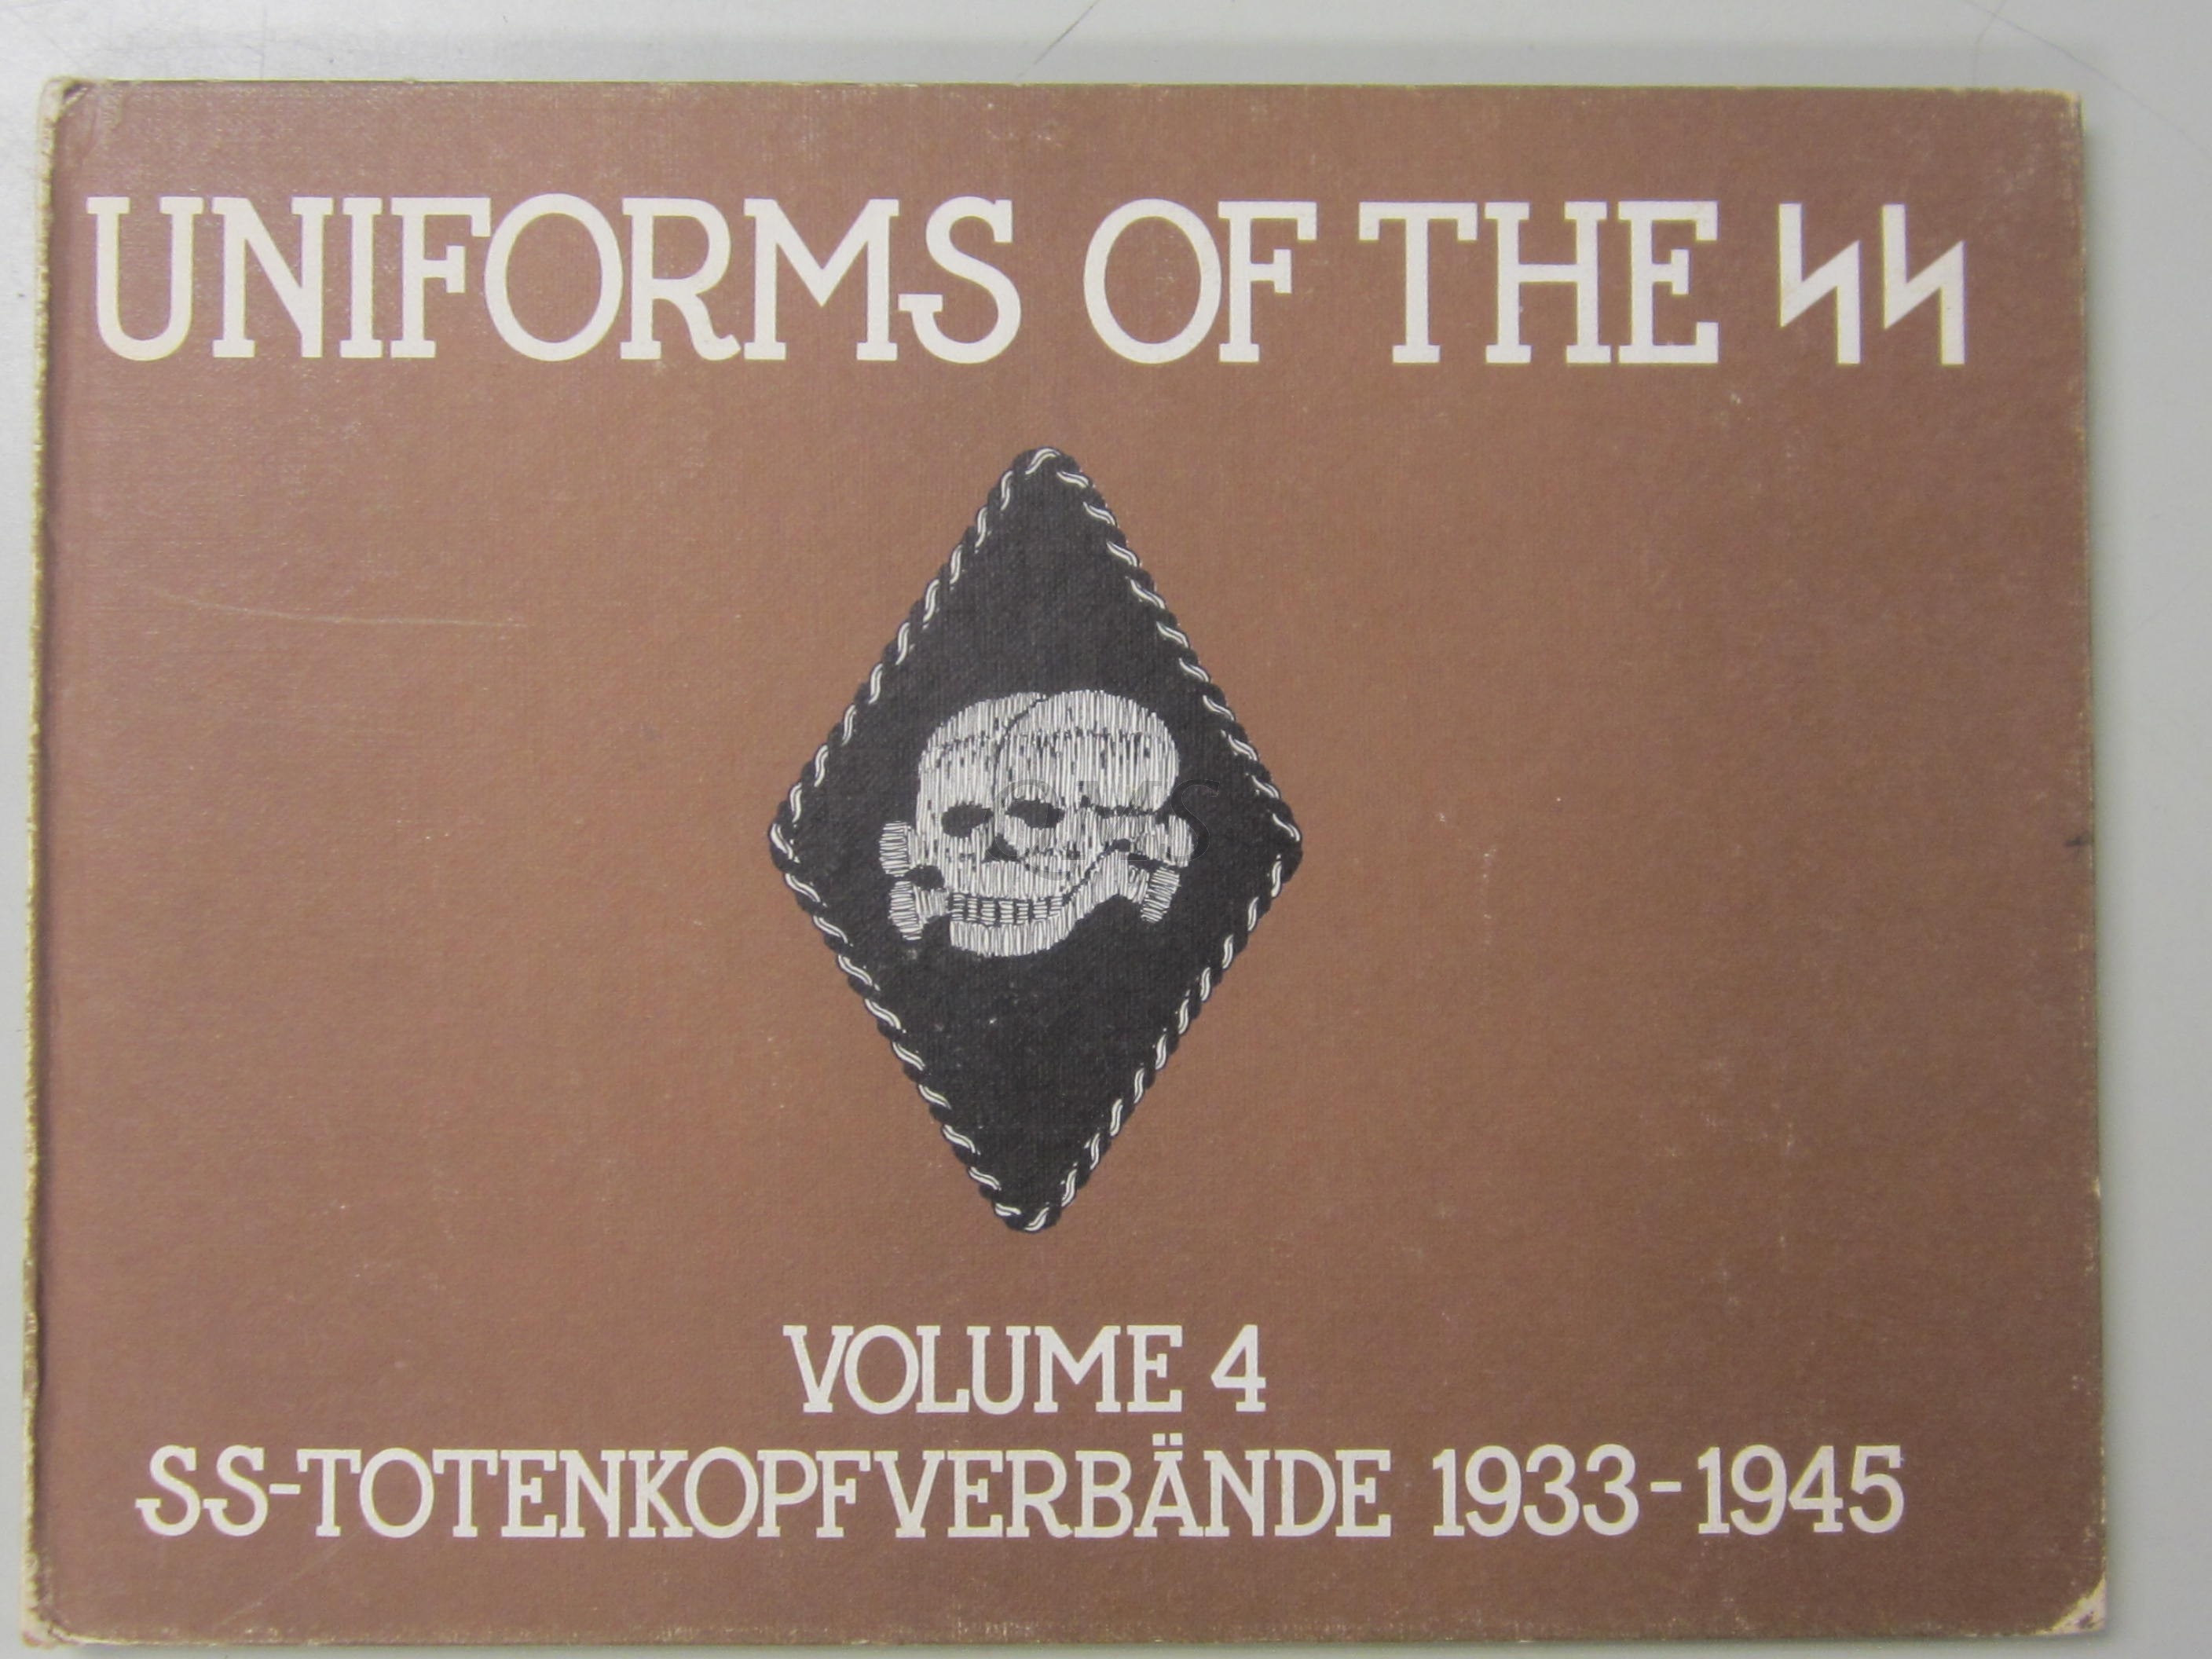 Эндрю текст. Uniforms of the SS, collected Edition Vol. 1-6..